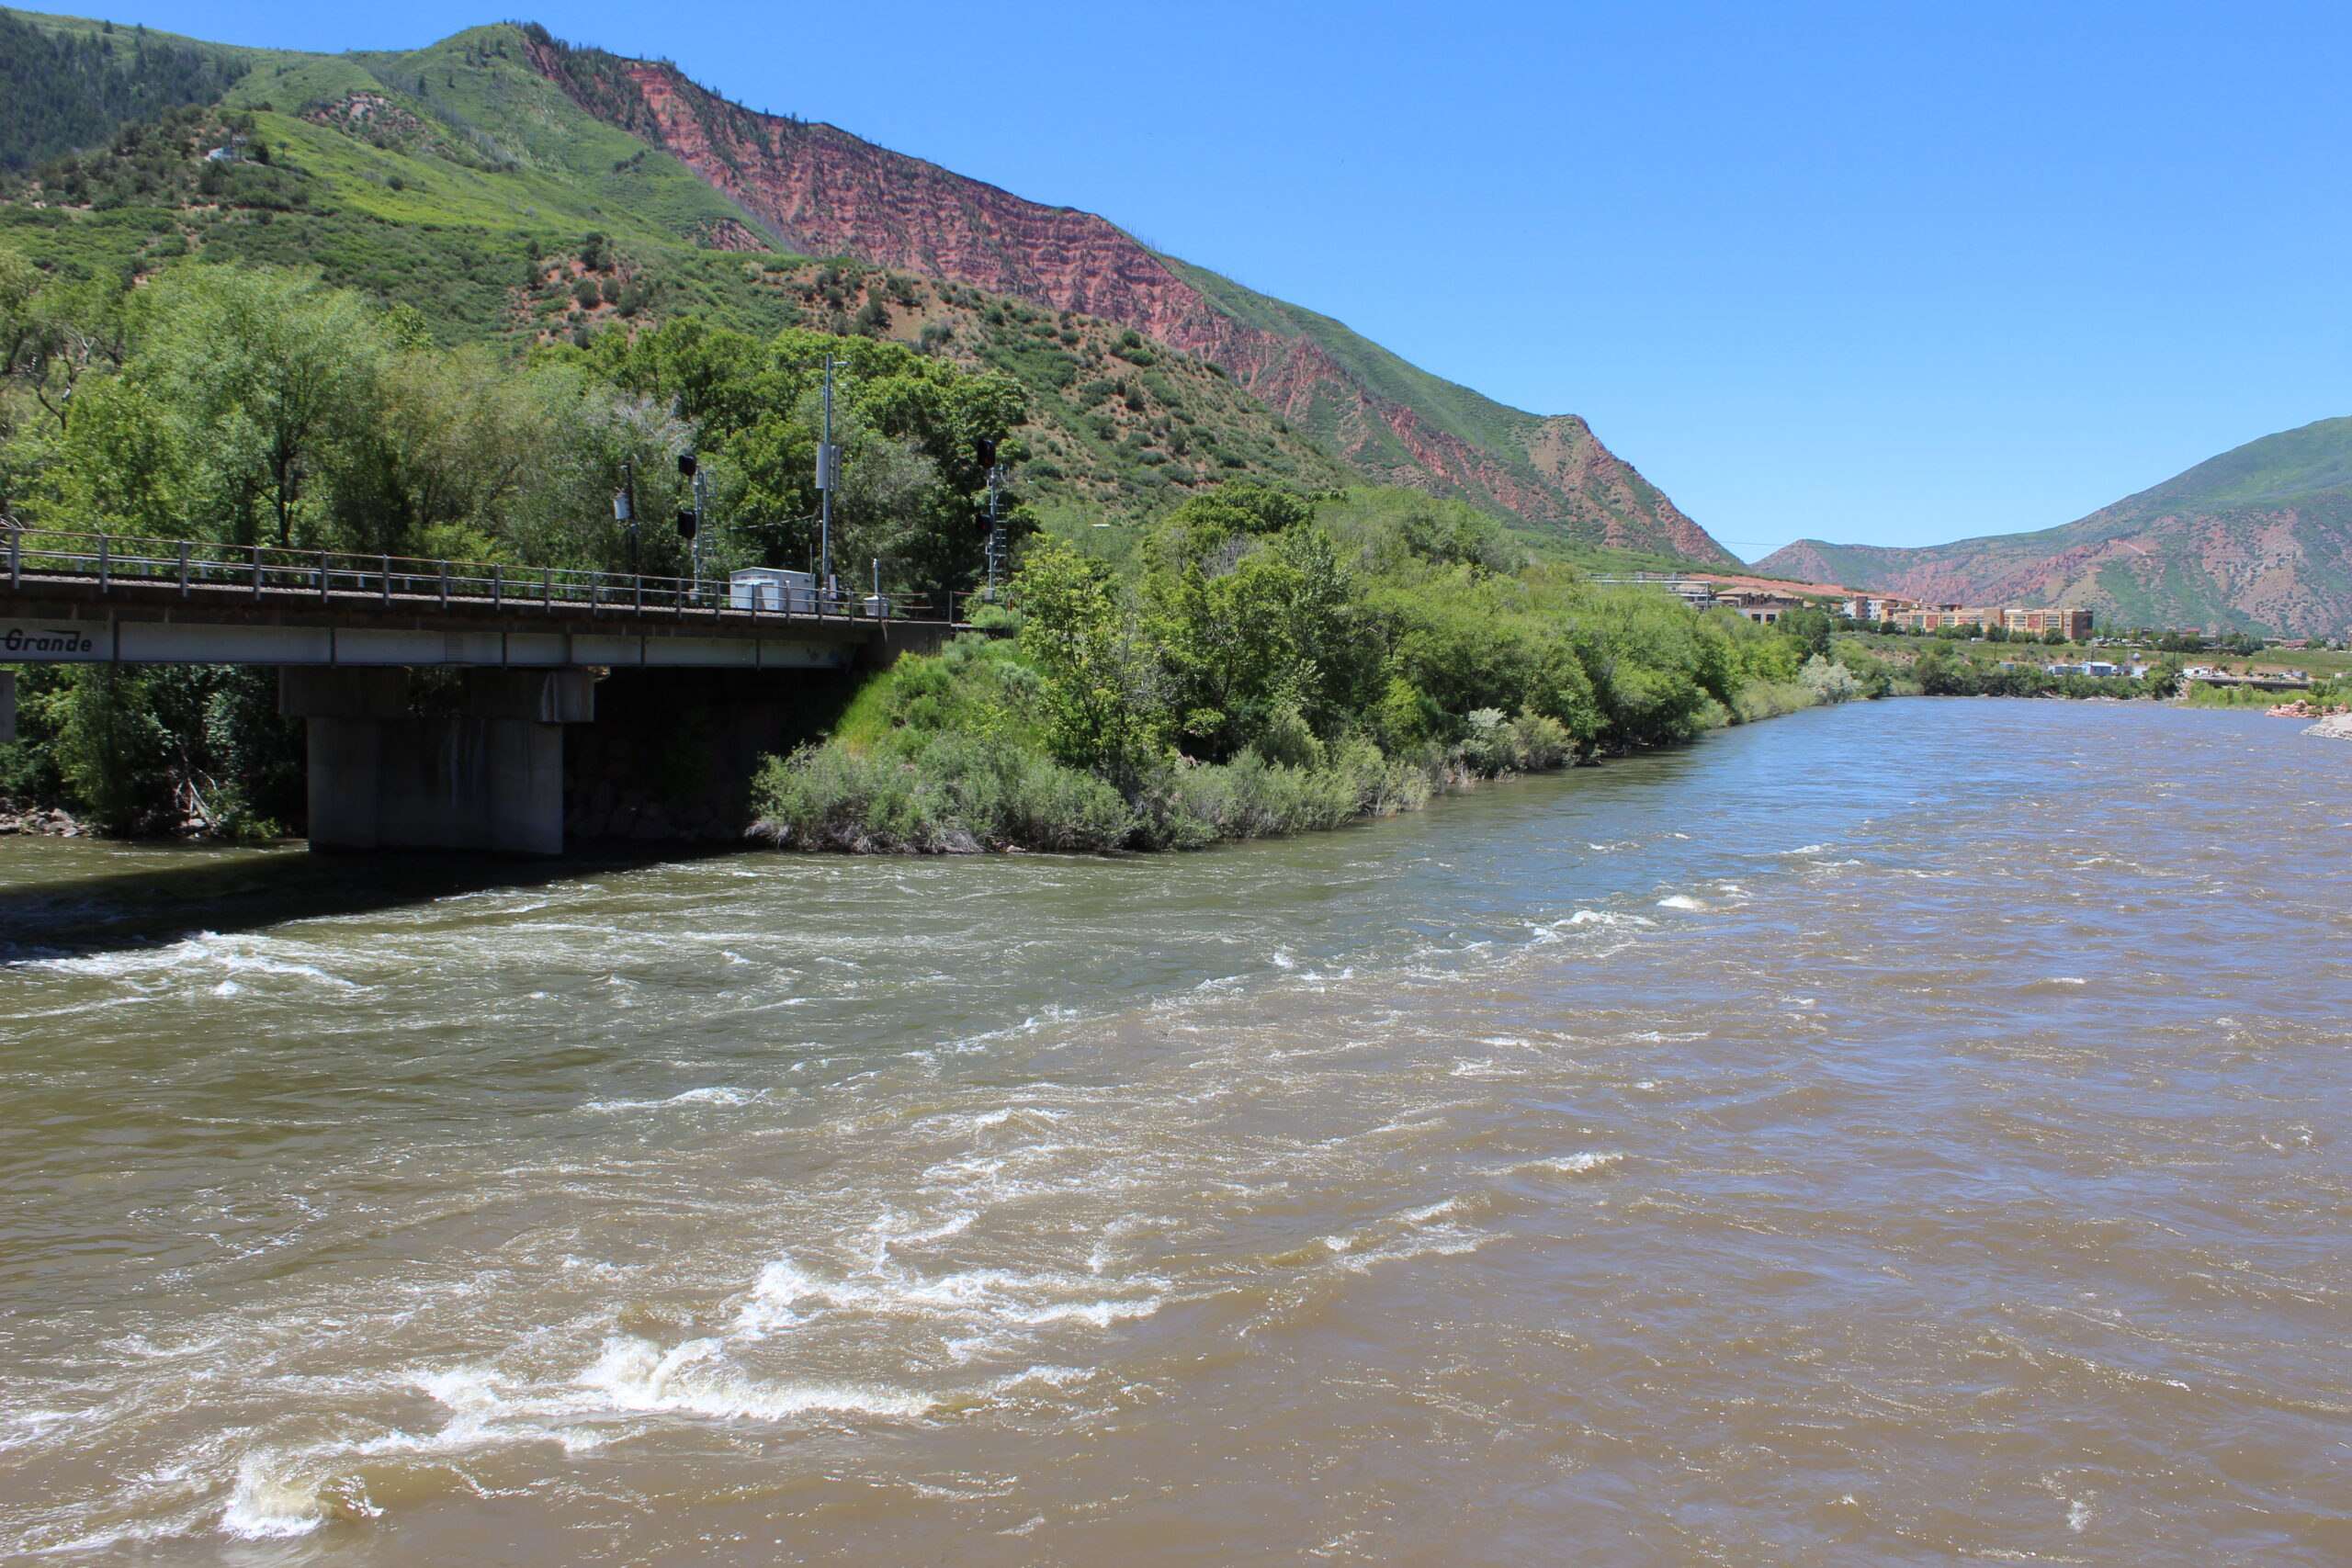 The confluence of the Roaring Fork and Colorado rivers in Glenwood Springs shows the differences between the two rivers in color and chemistry. But both have faced lower flows and warmer temperatures in recent years, impacted by human caused climate change.